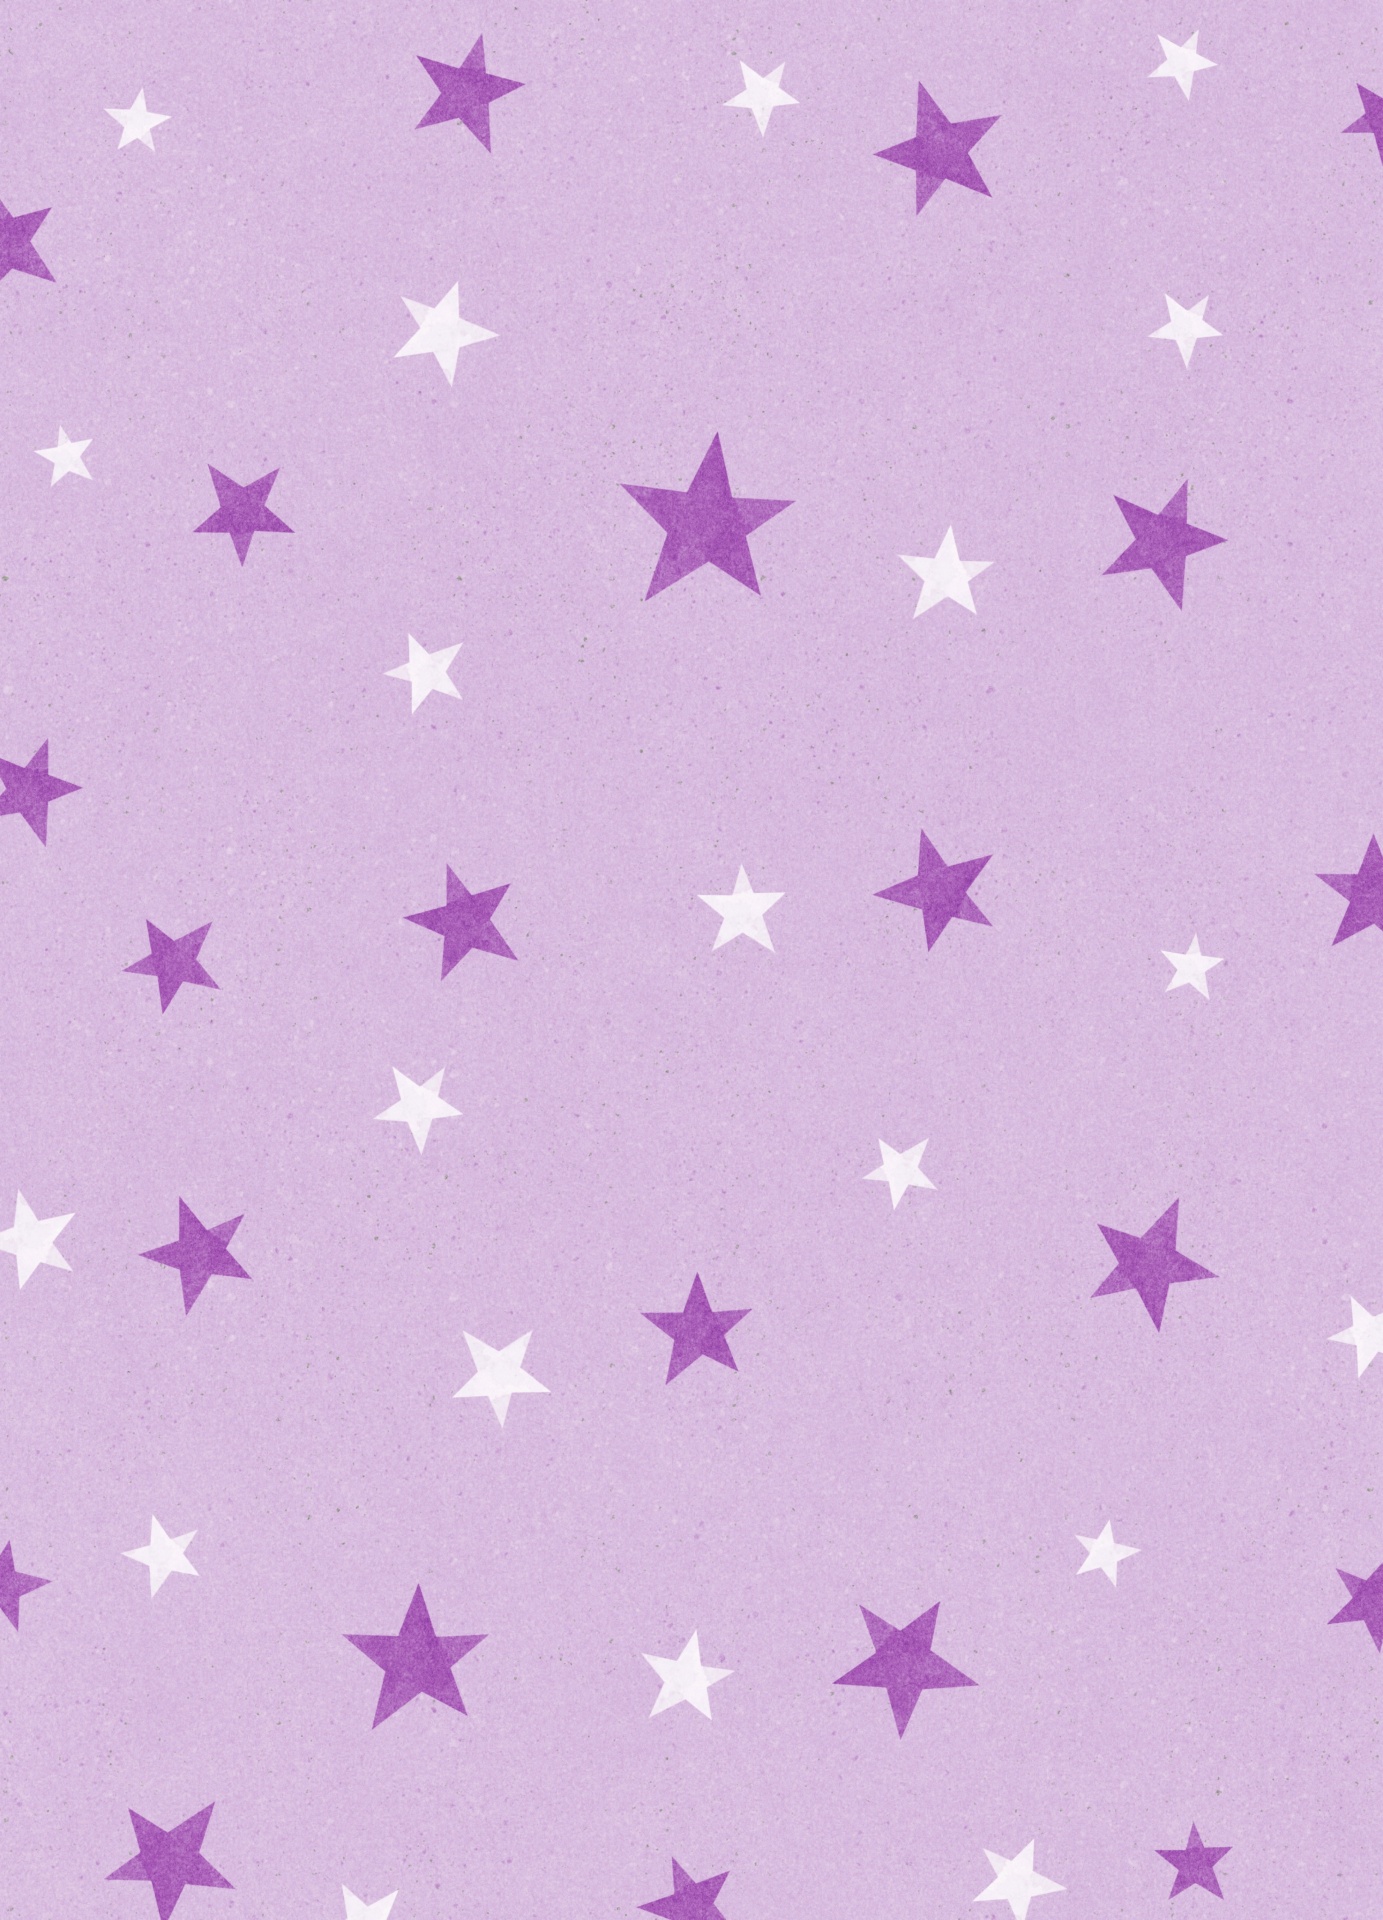 Stars Pattern Background Texture Free Stock Photo - Public Domain Pictures